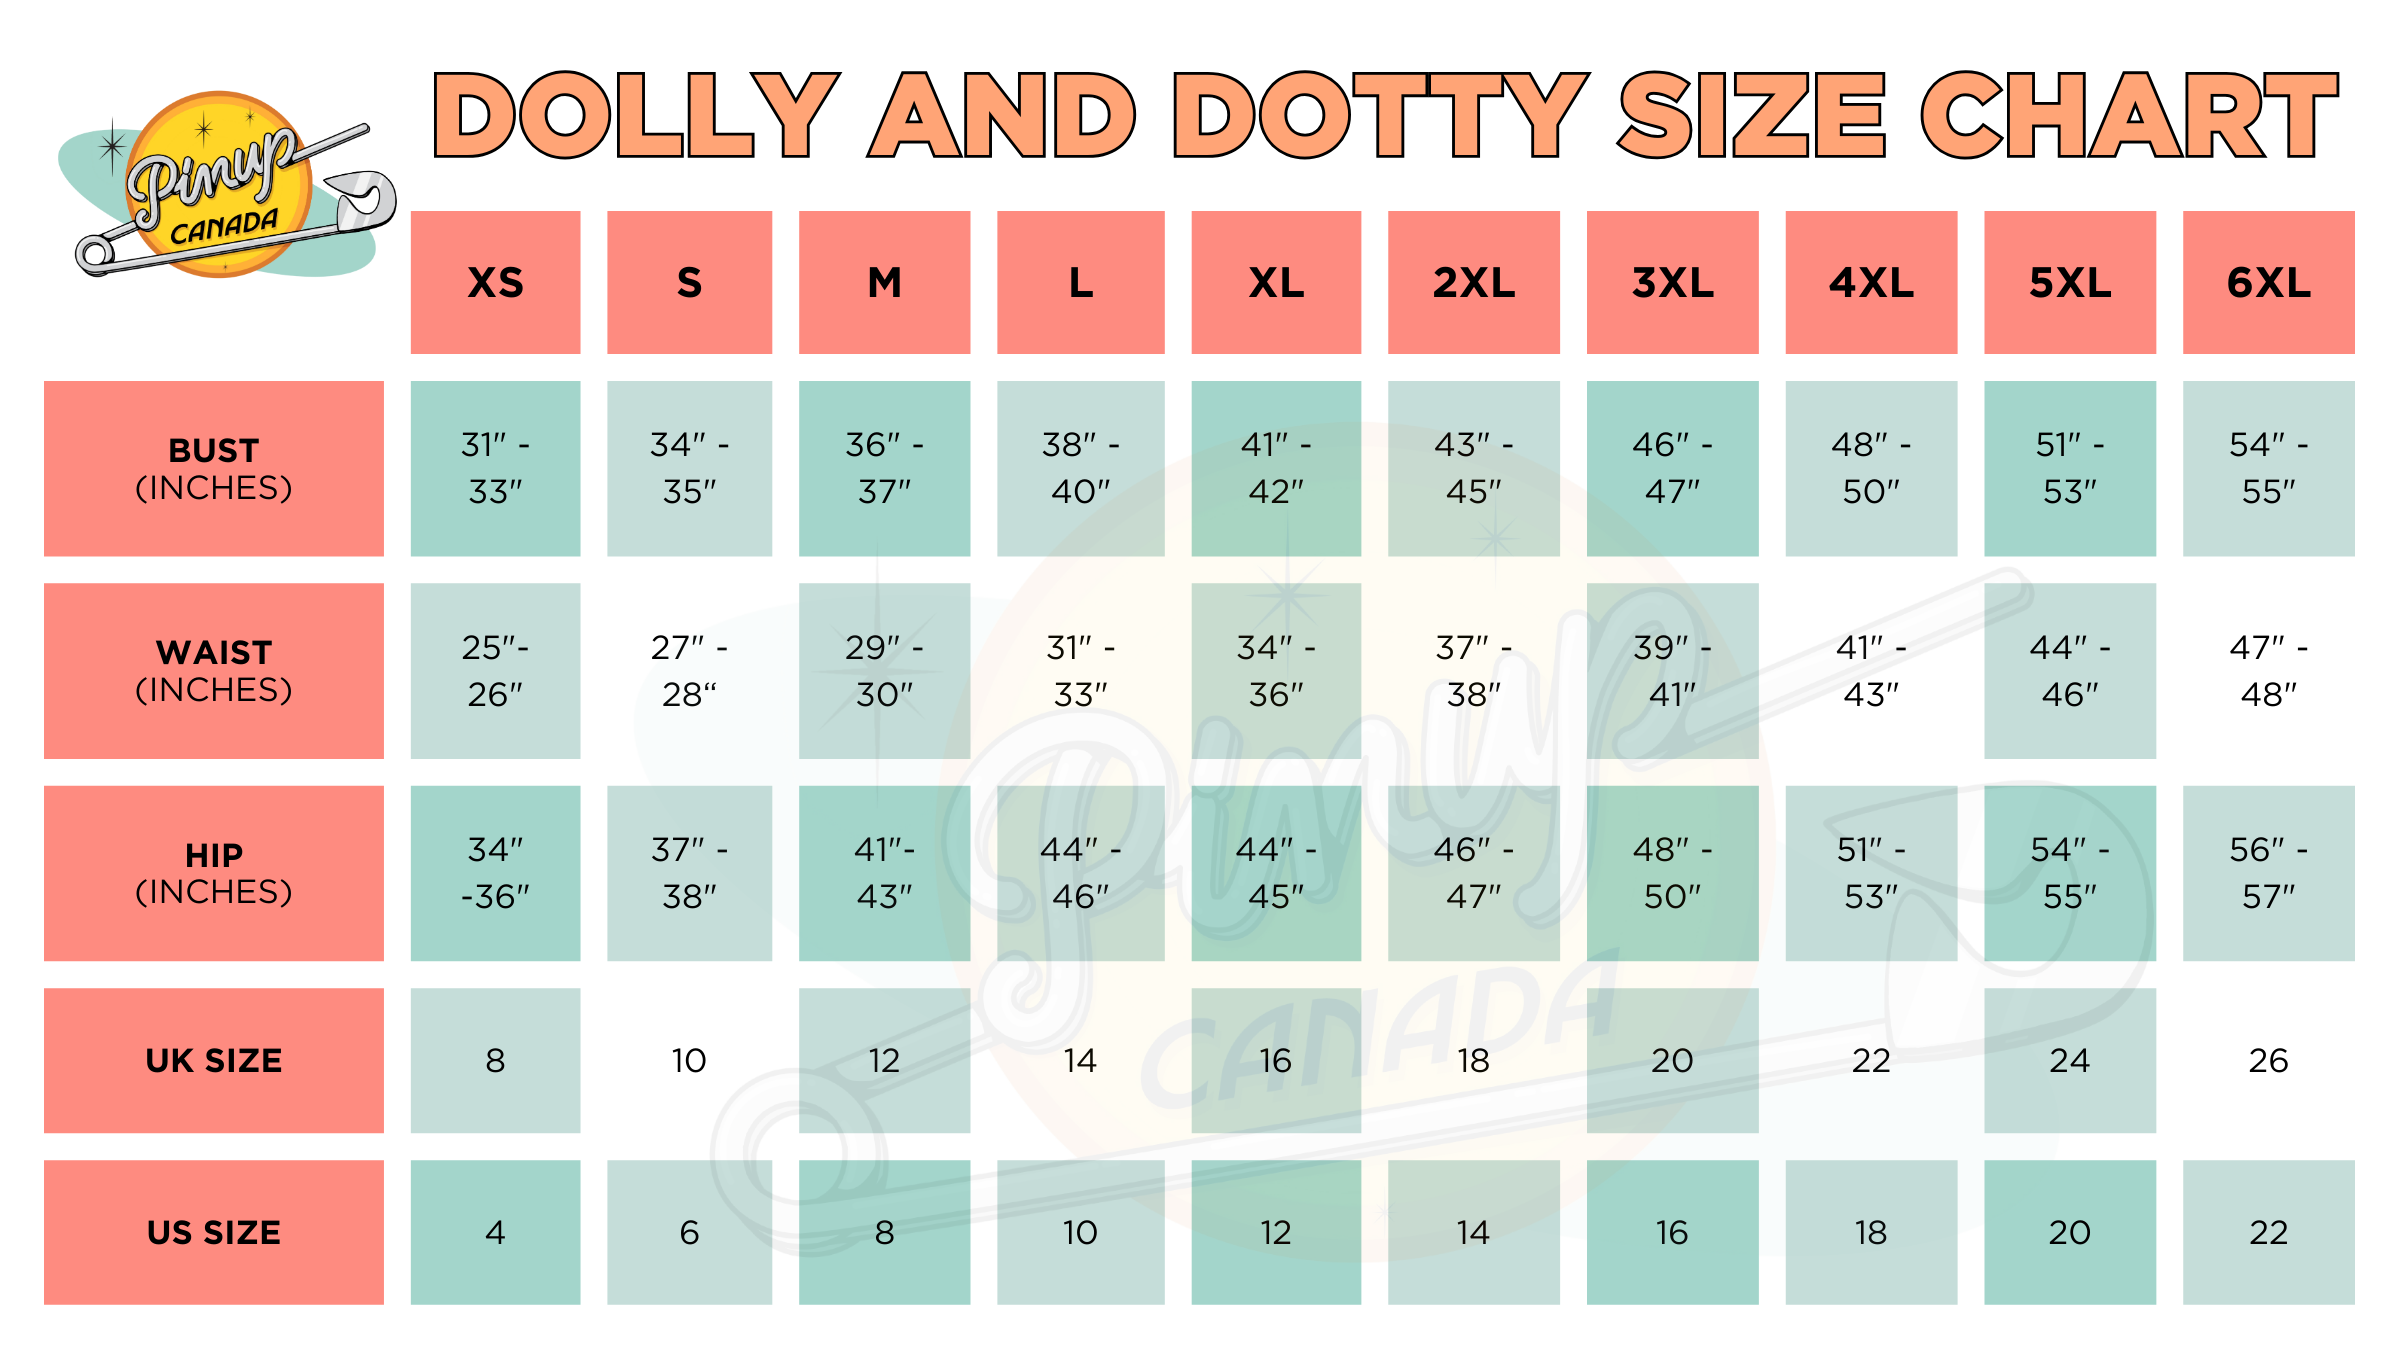 Dolly and Dotty Size Chart